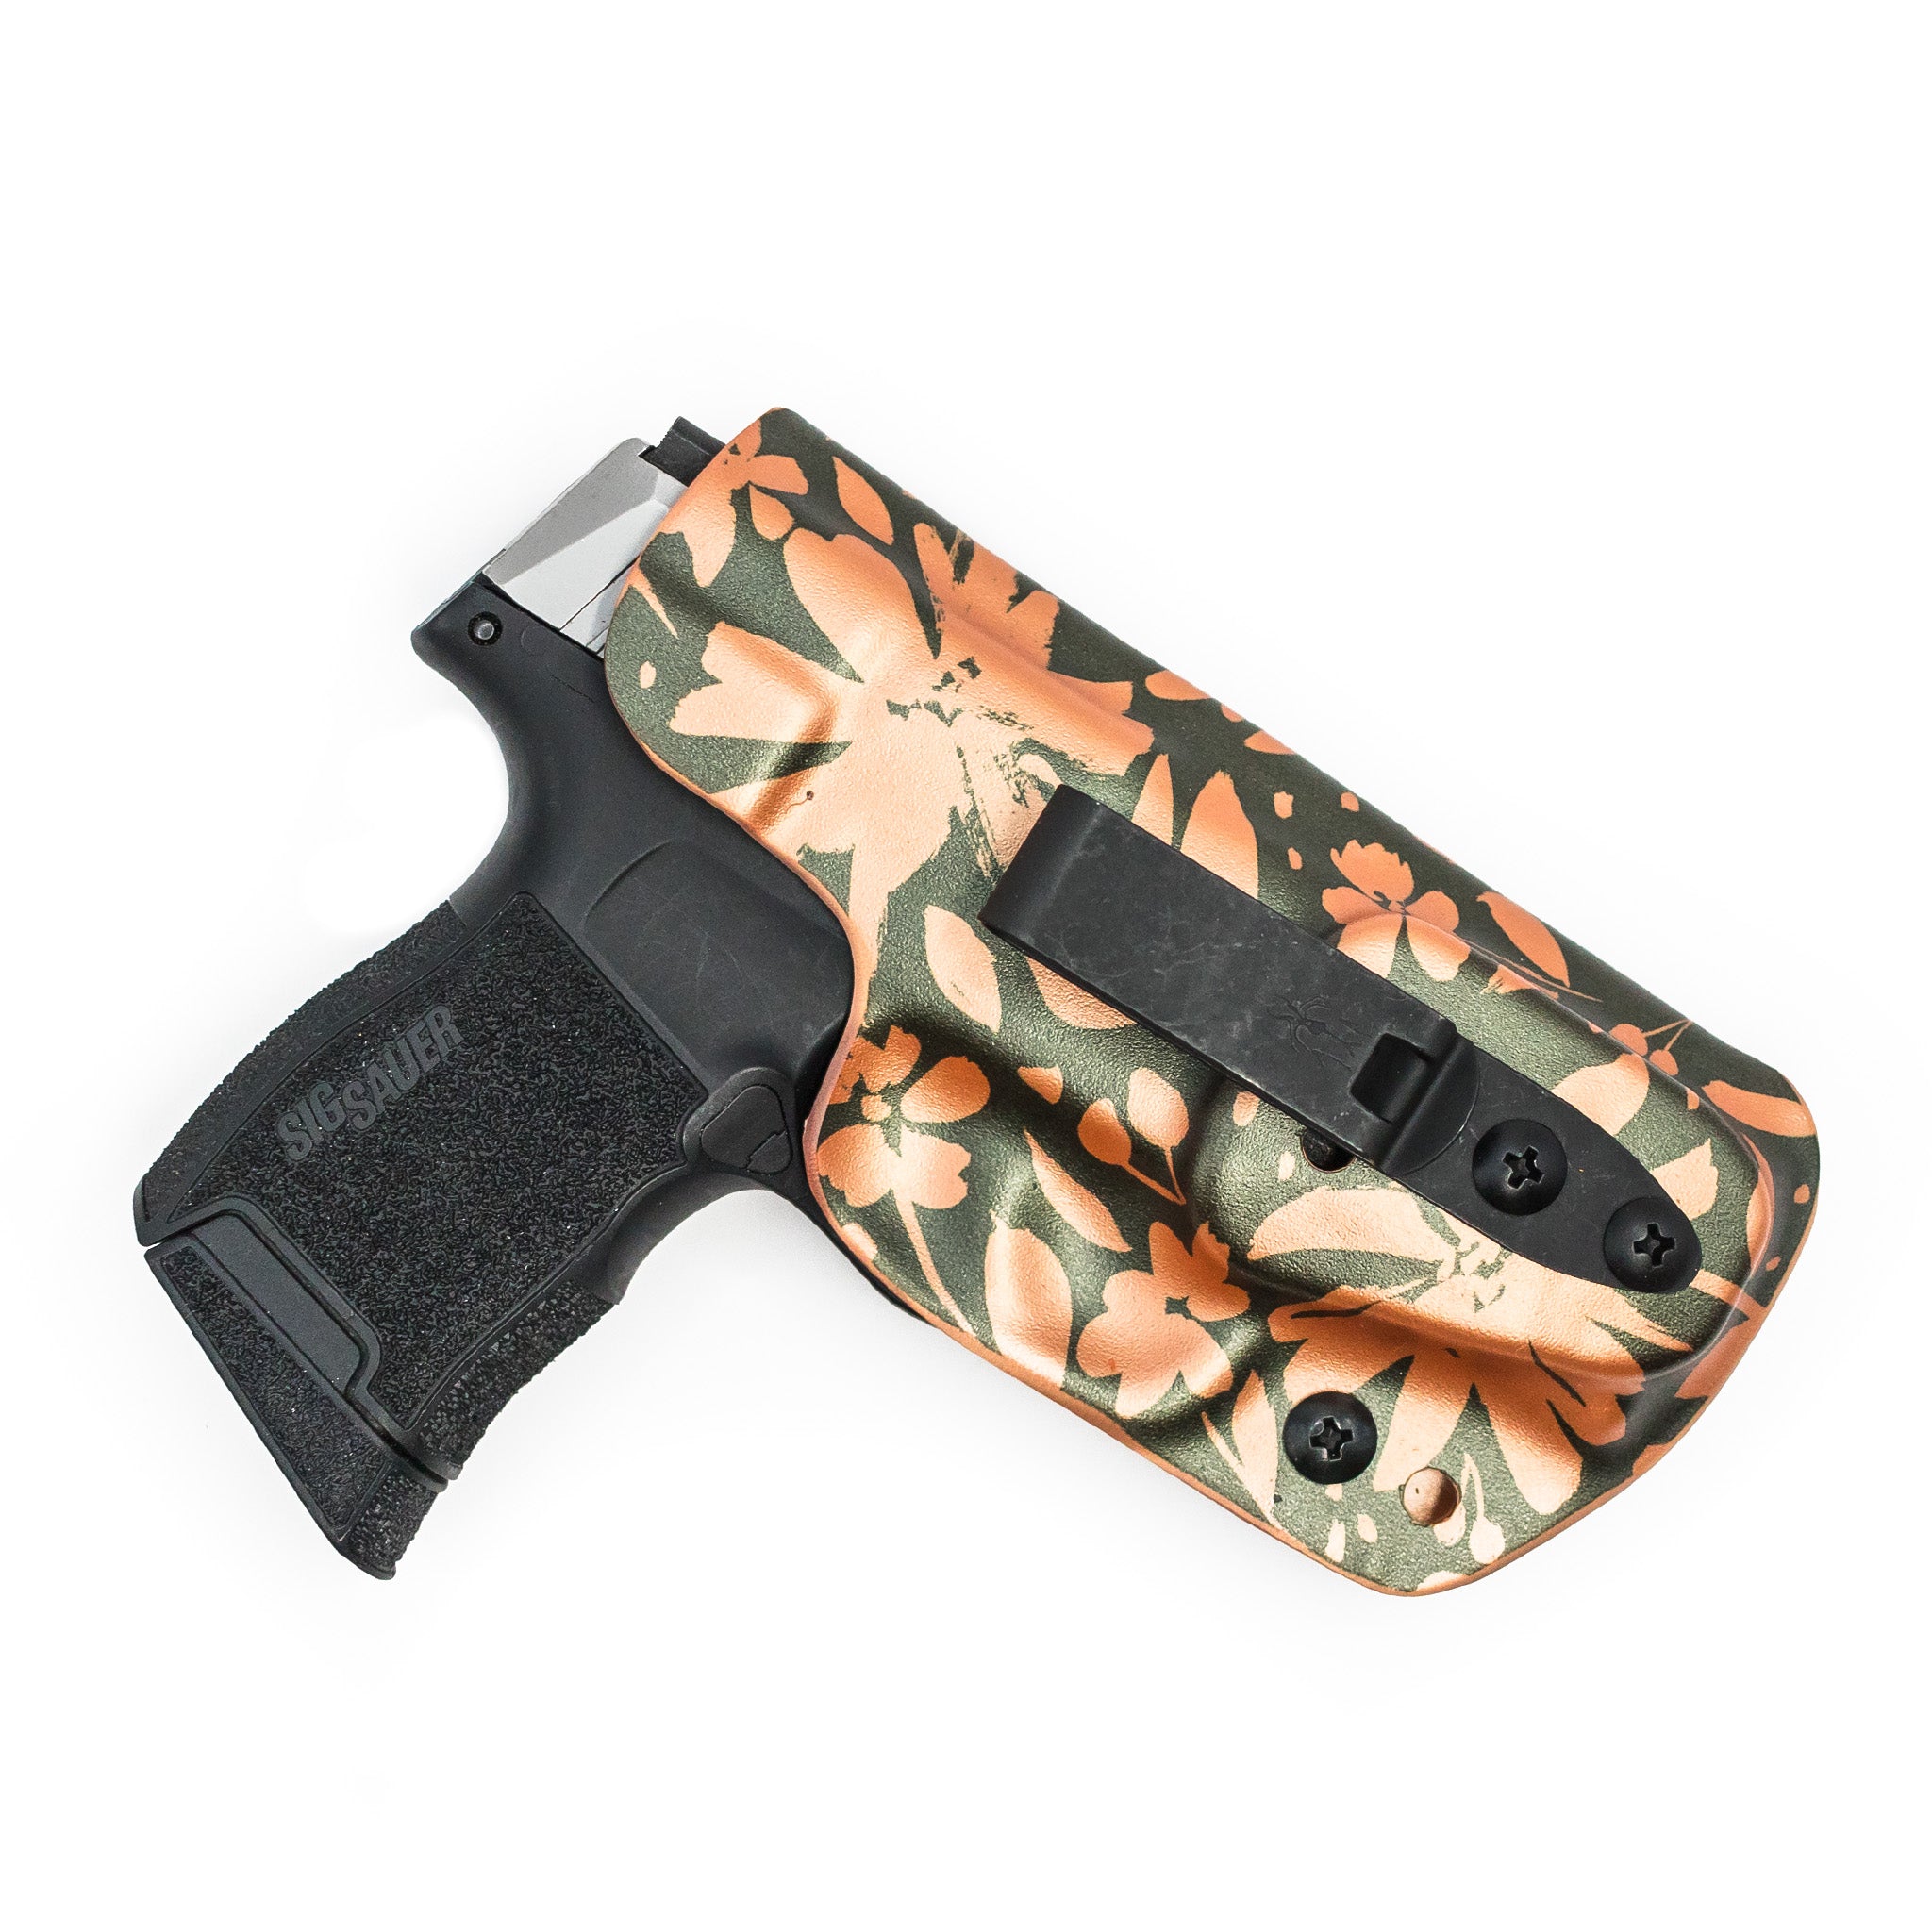 Boutique Print Betty 2.0 inside for Flashbang Holsters the - holsters waistband women